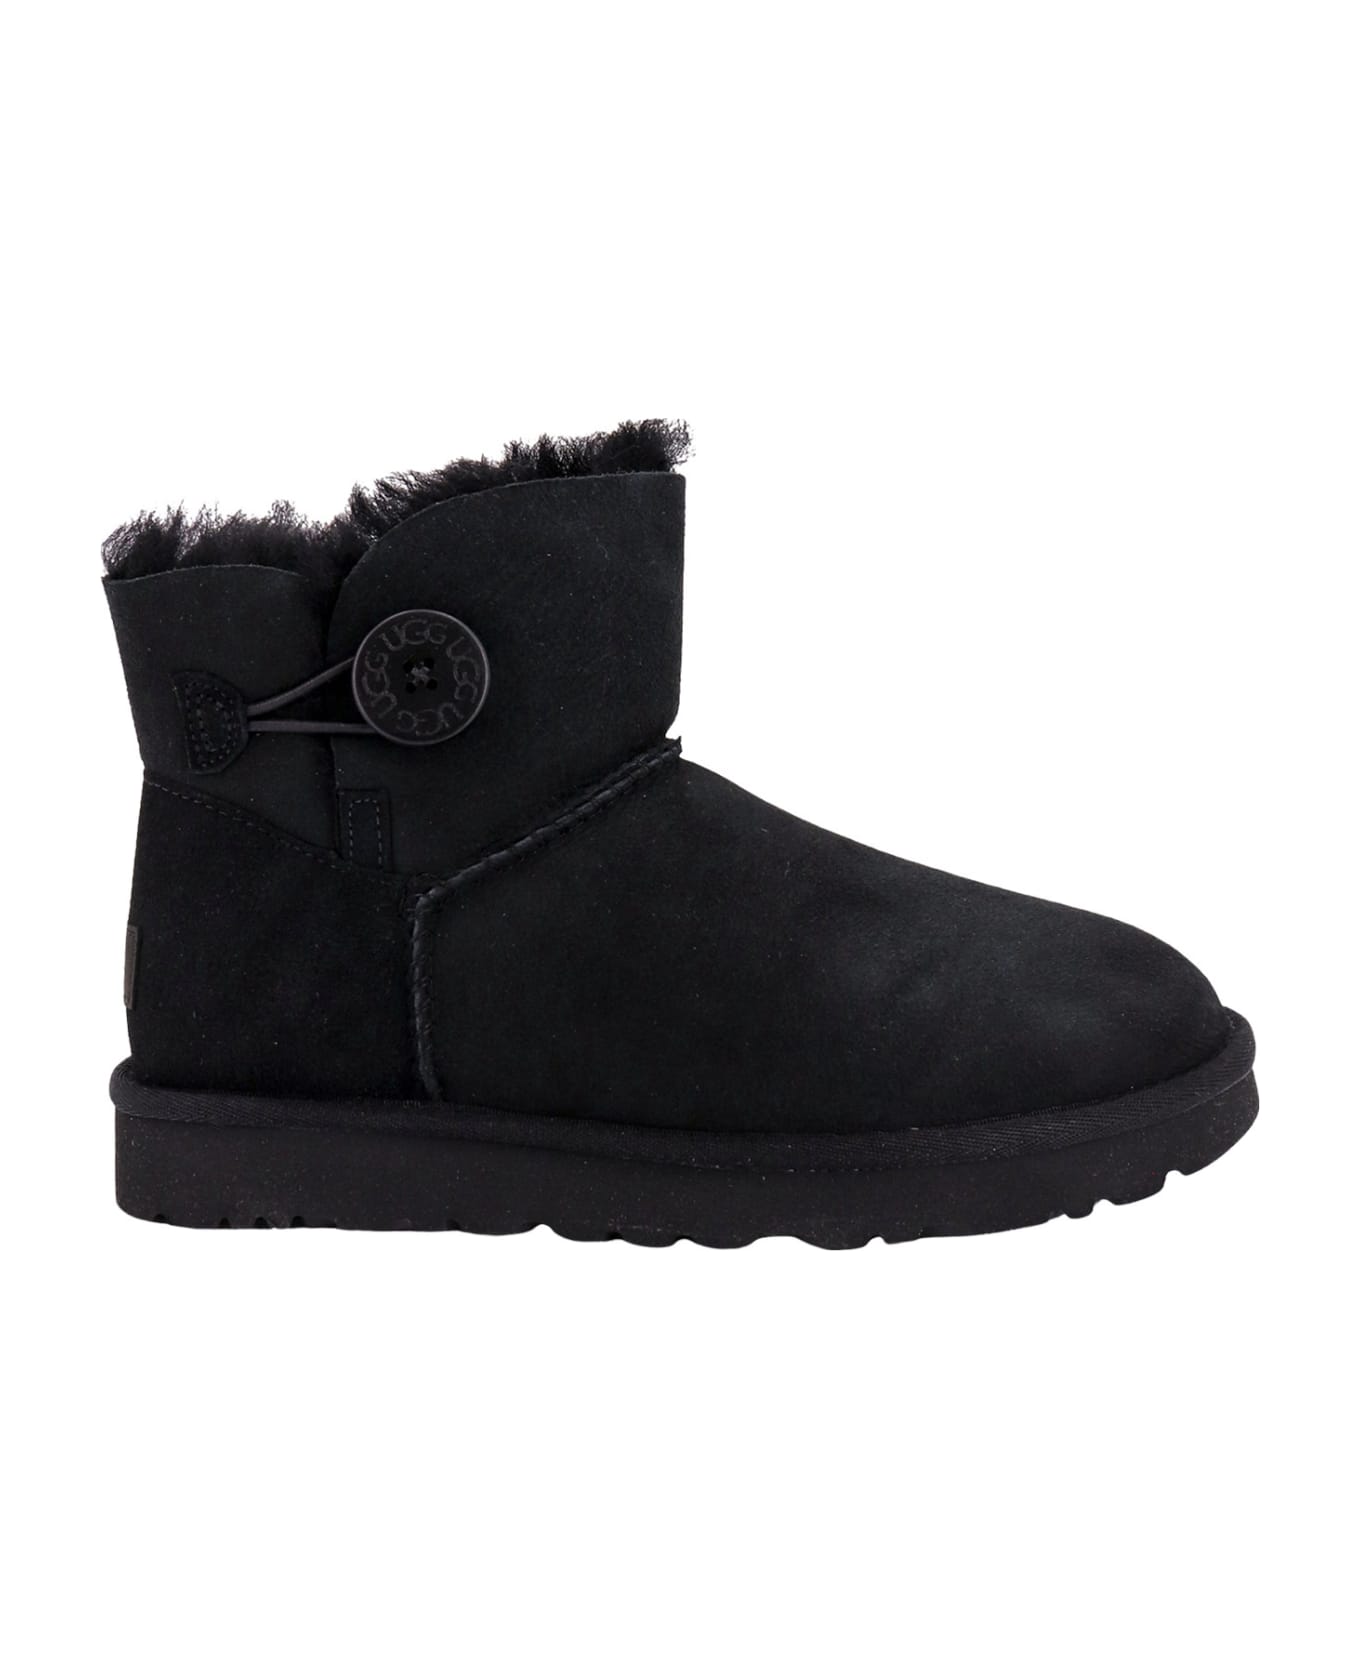 UGG Mini Baley Button Ankle Boots - Black